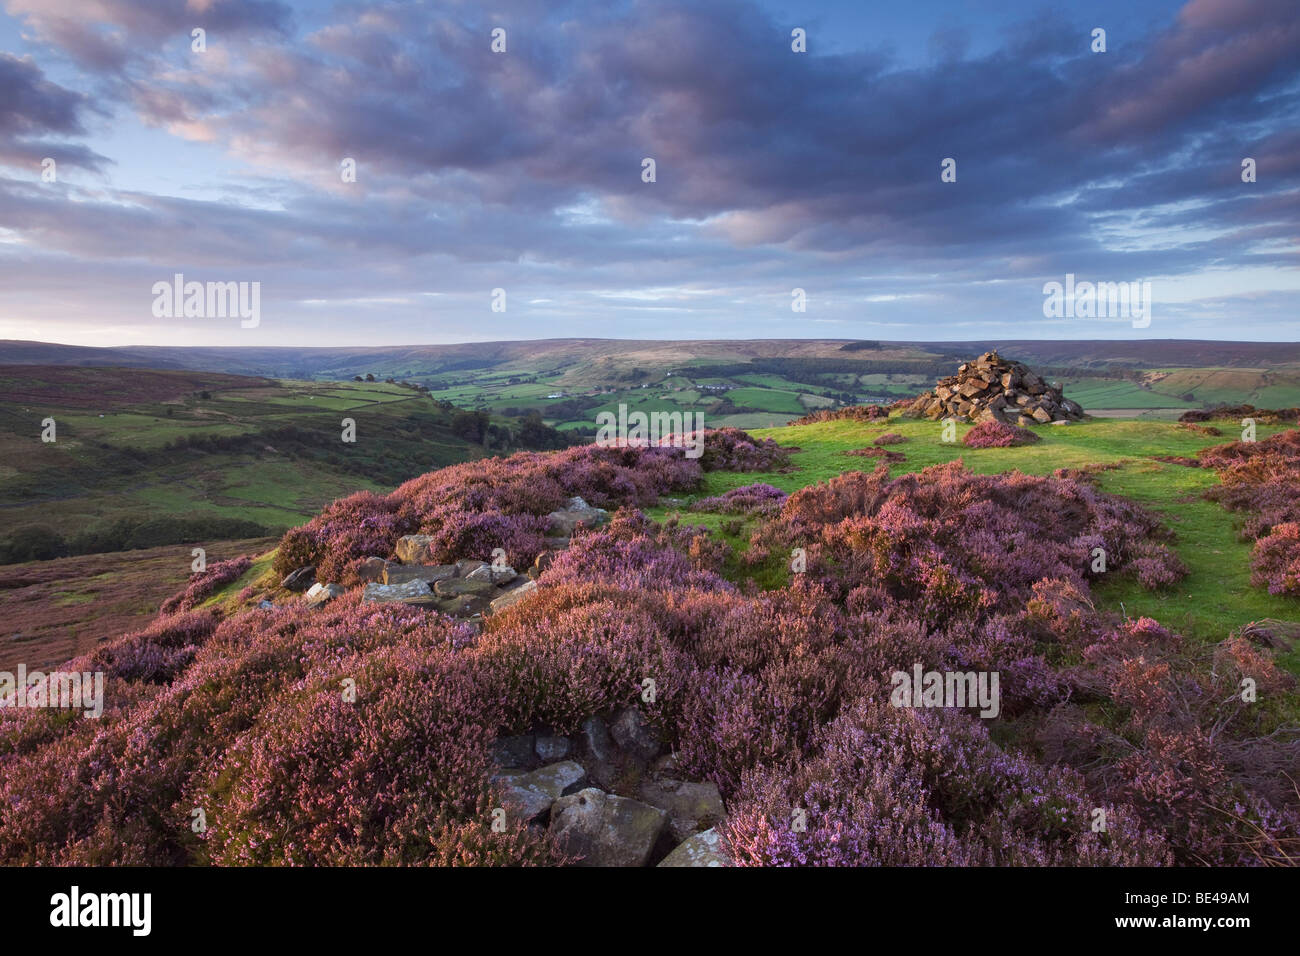 Heather above Rosedale in the North York Moors National Park in the evening, North Yorkshire, England, United Kingdom Stock Photo